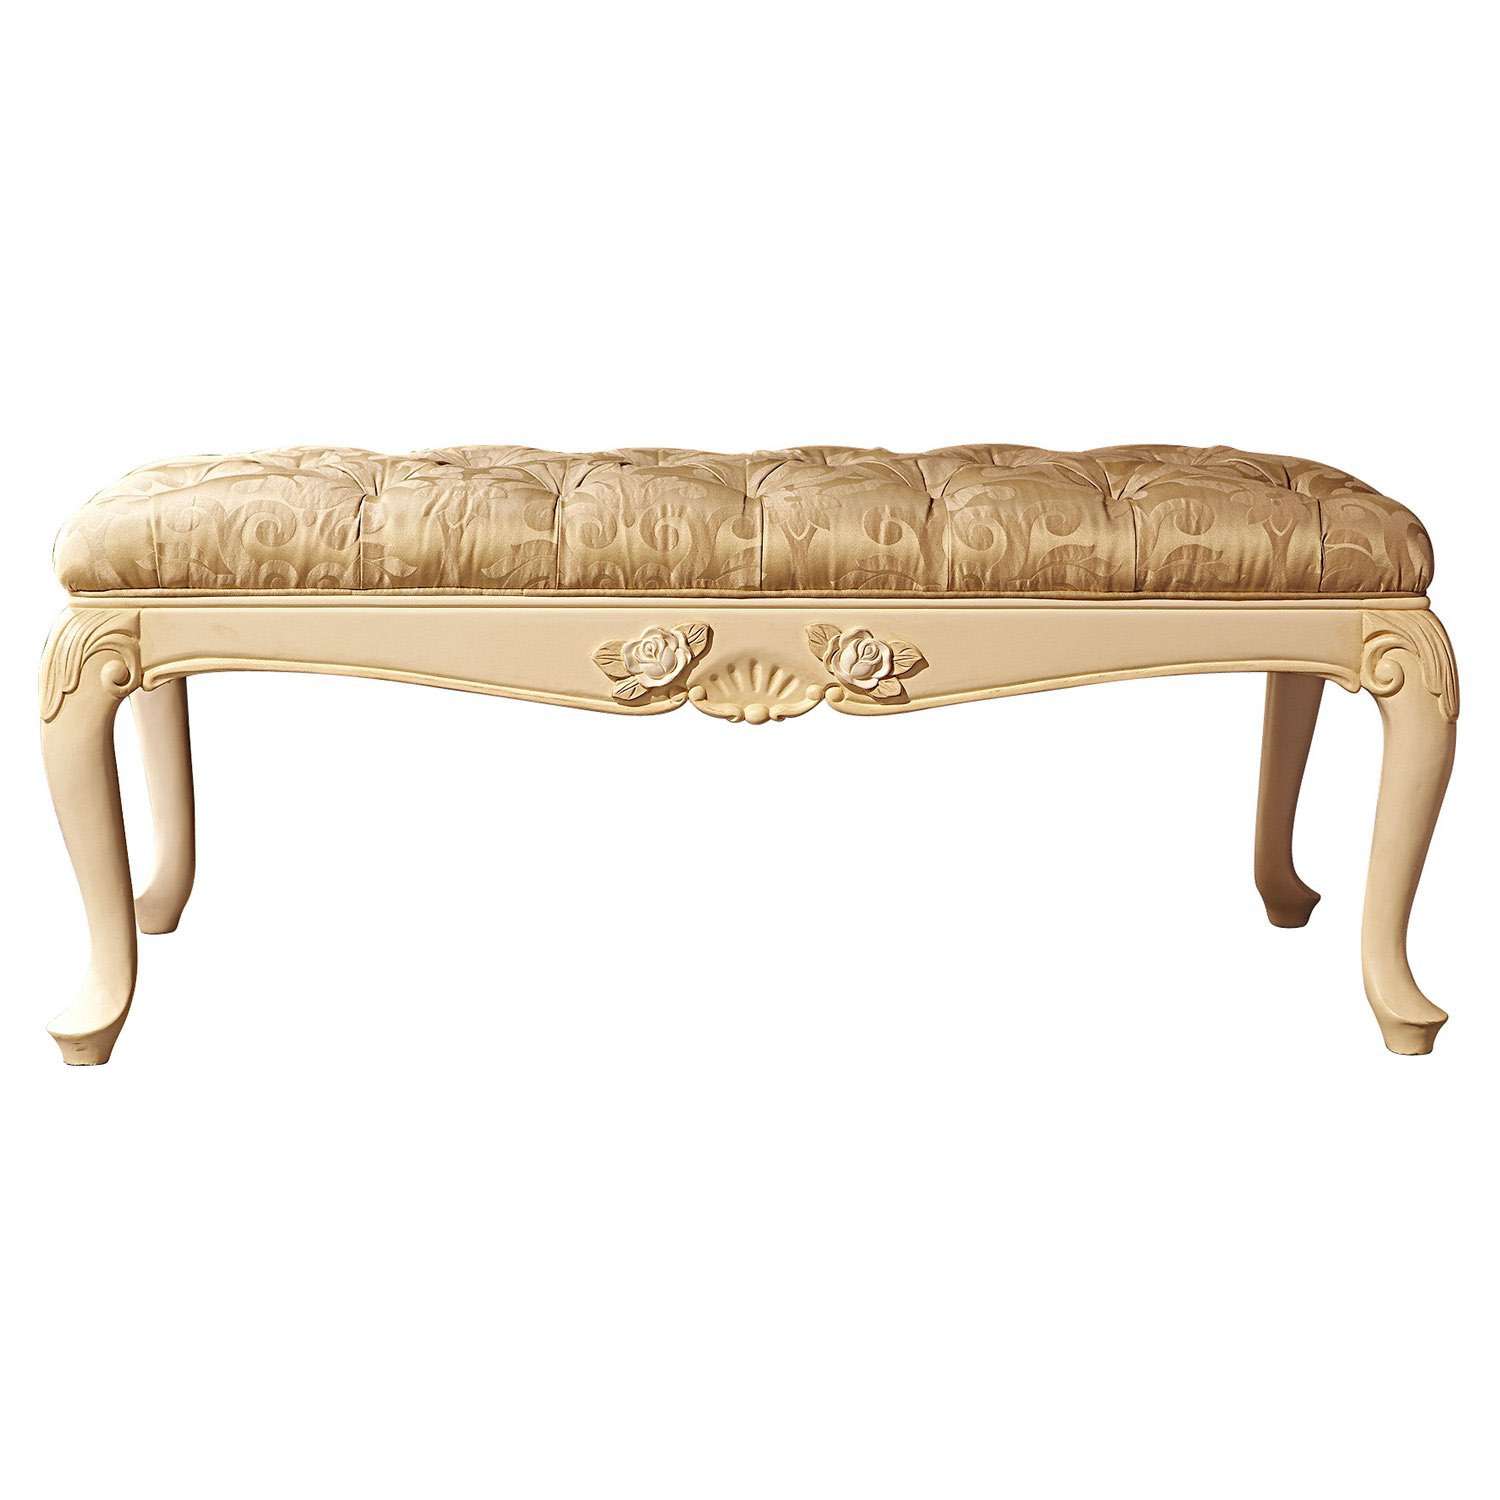 Bedroom Bench Upholstered Bench Wooden Bench